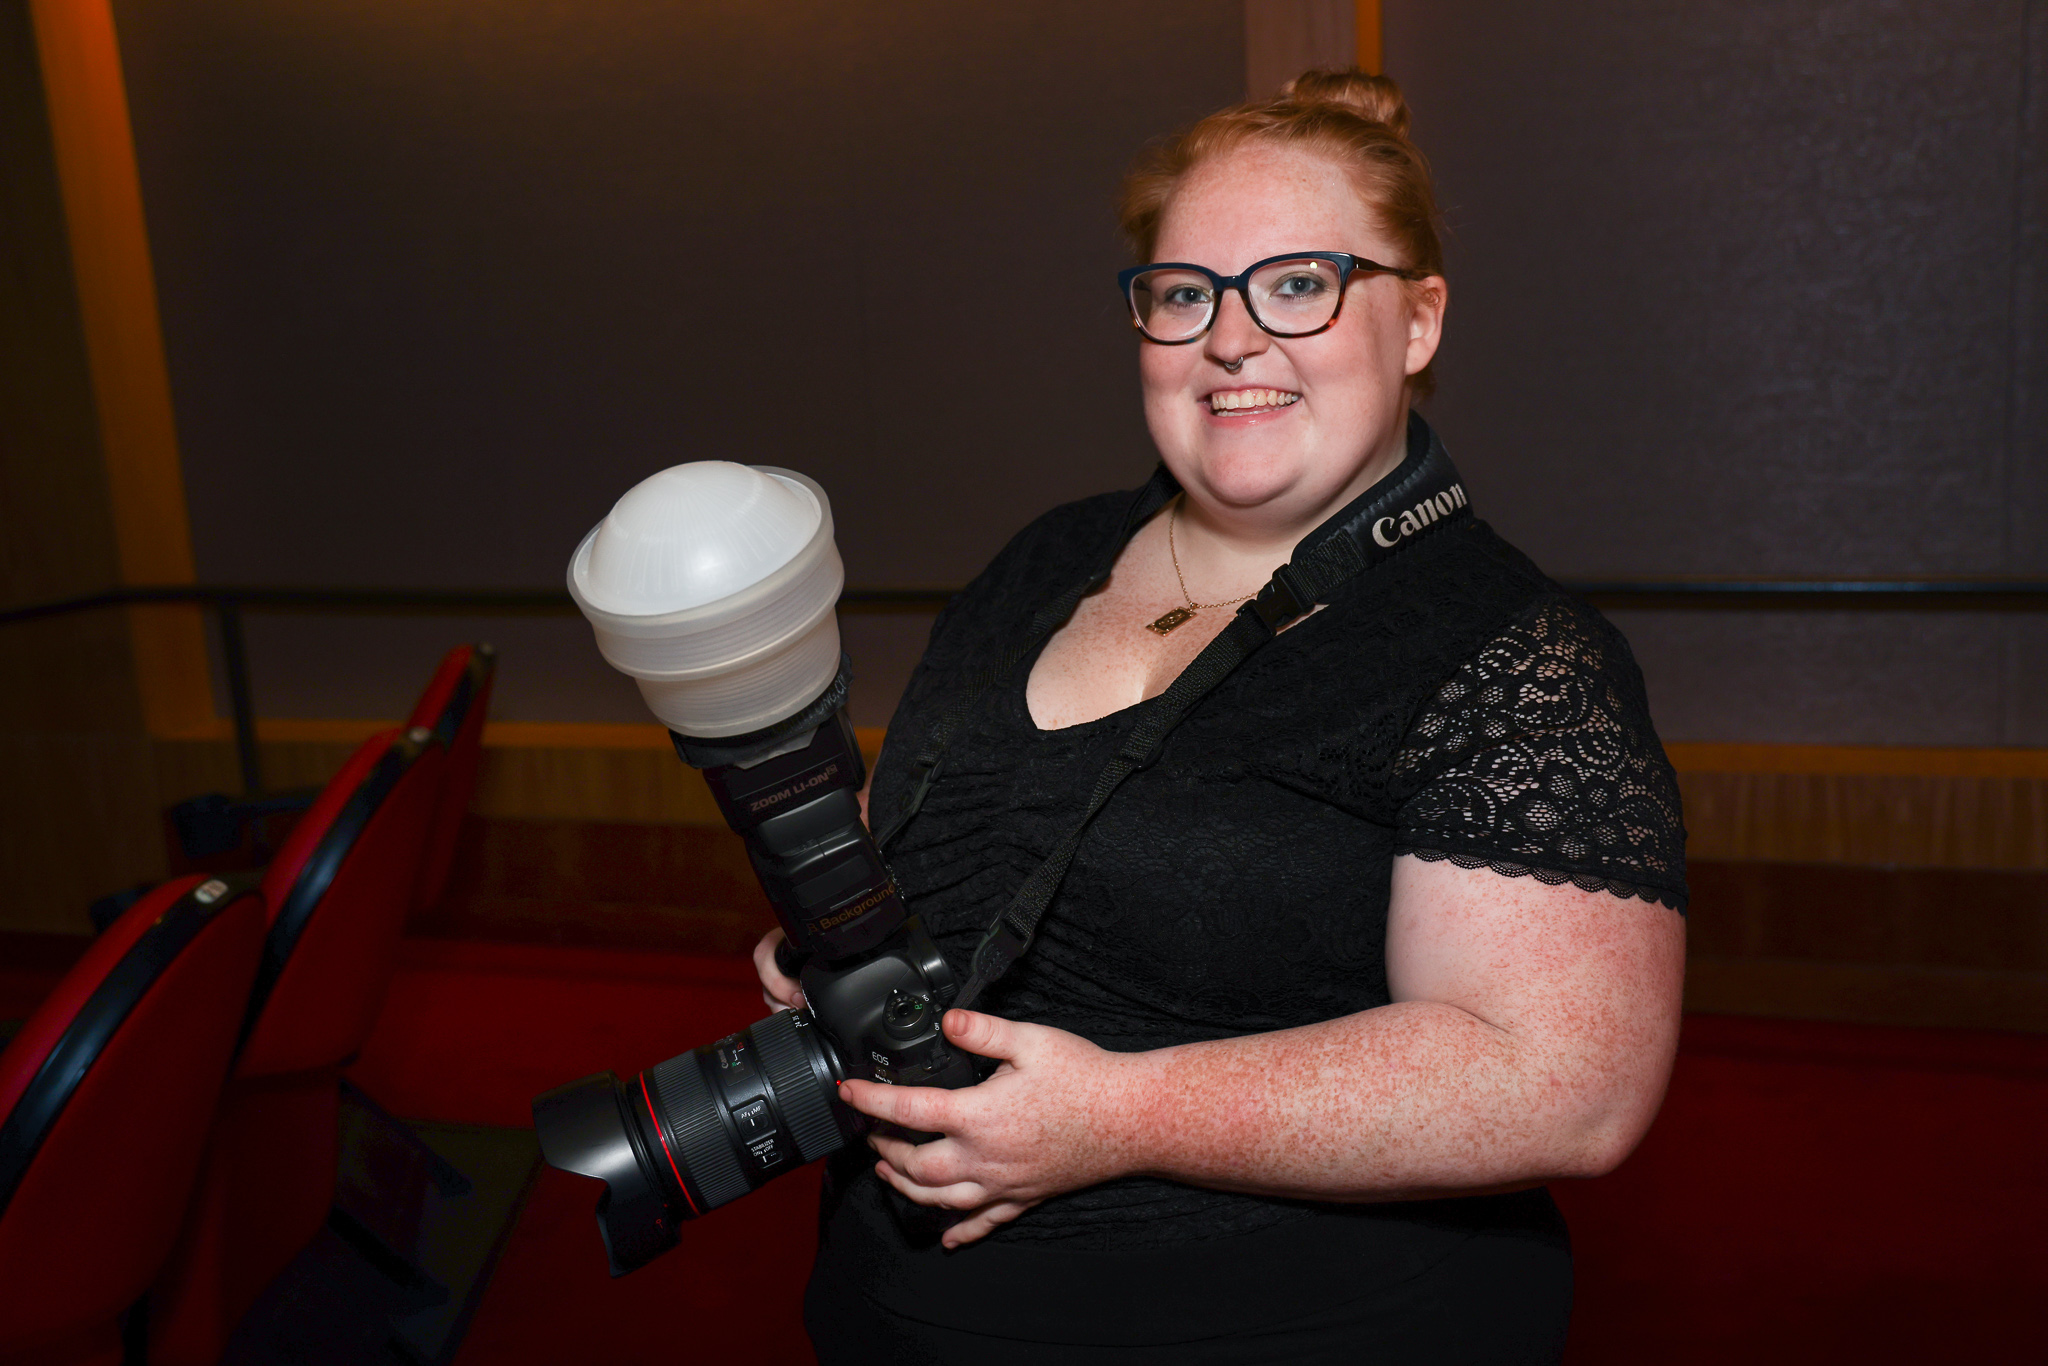 photo of a young female photographer with red hair holding a camera with flash